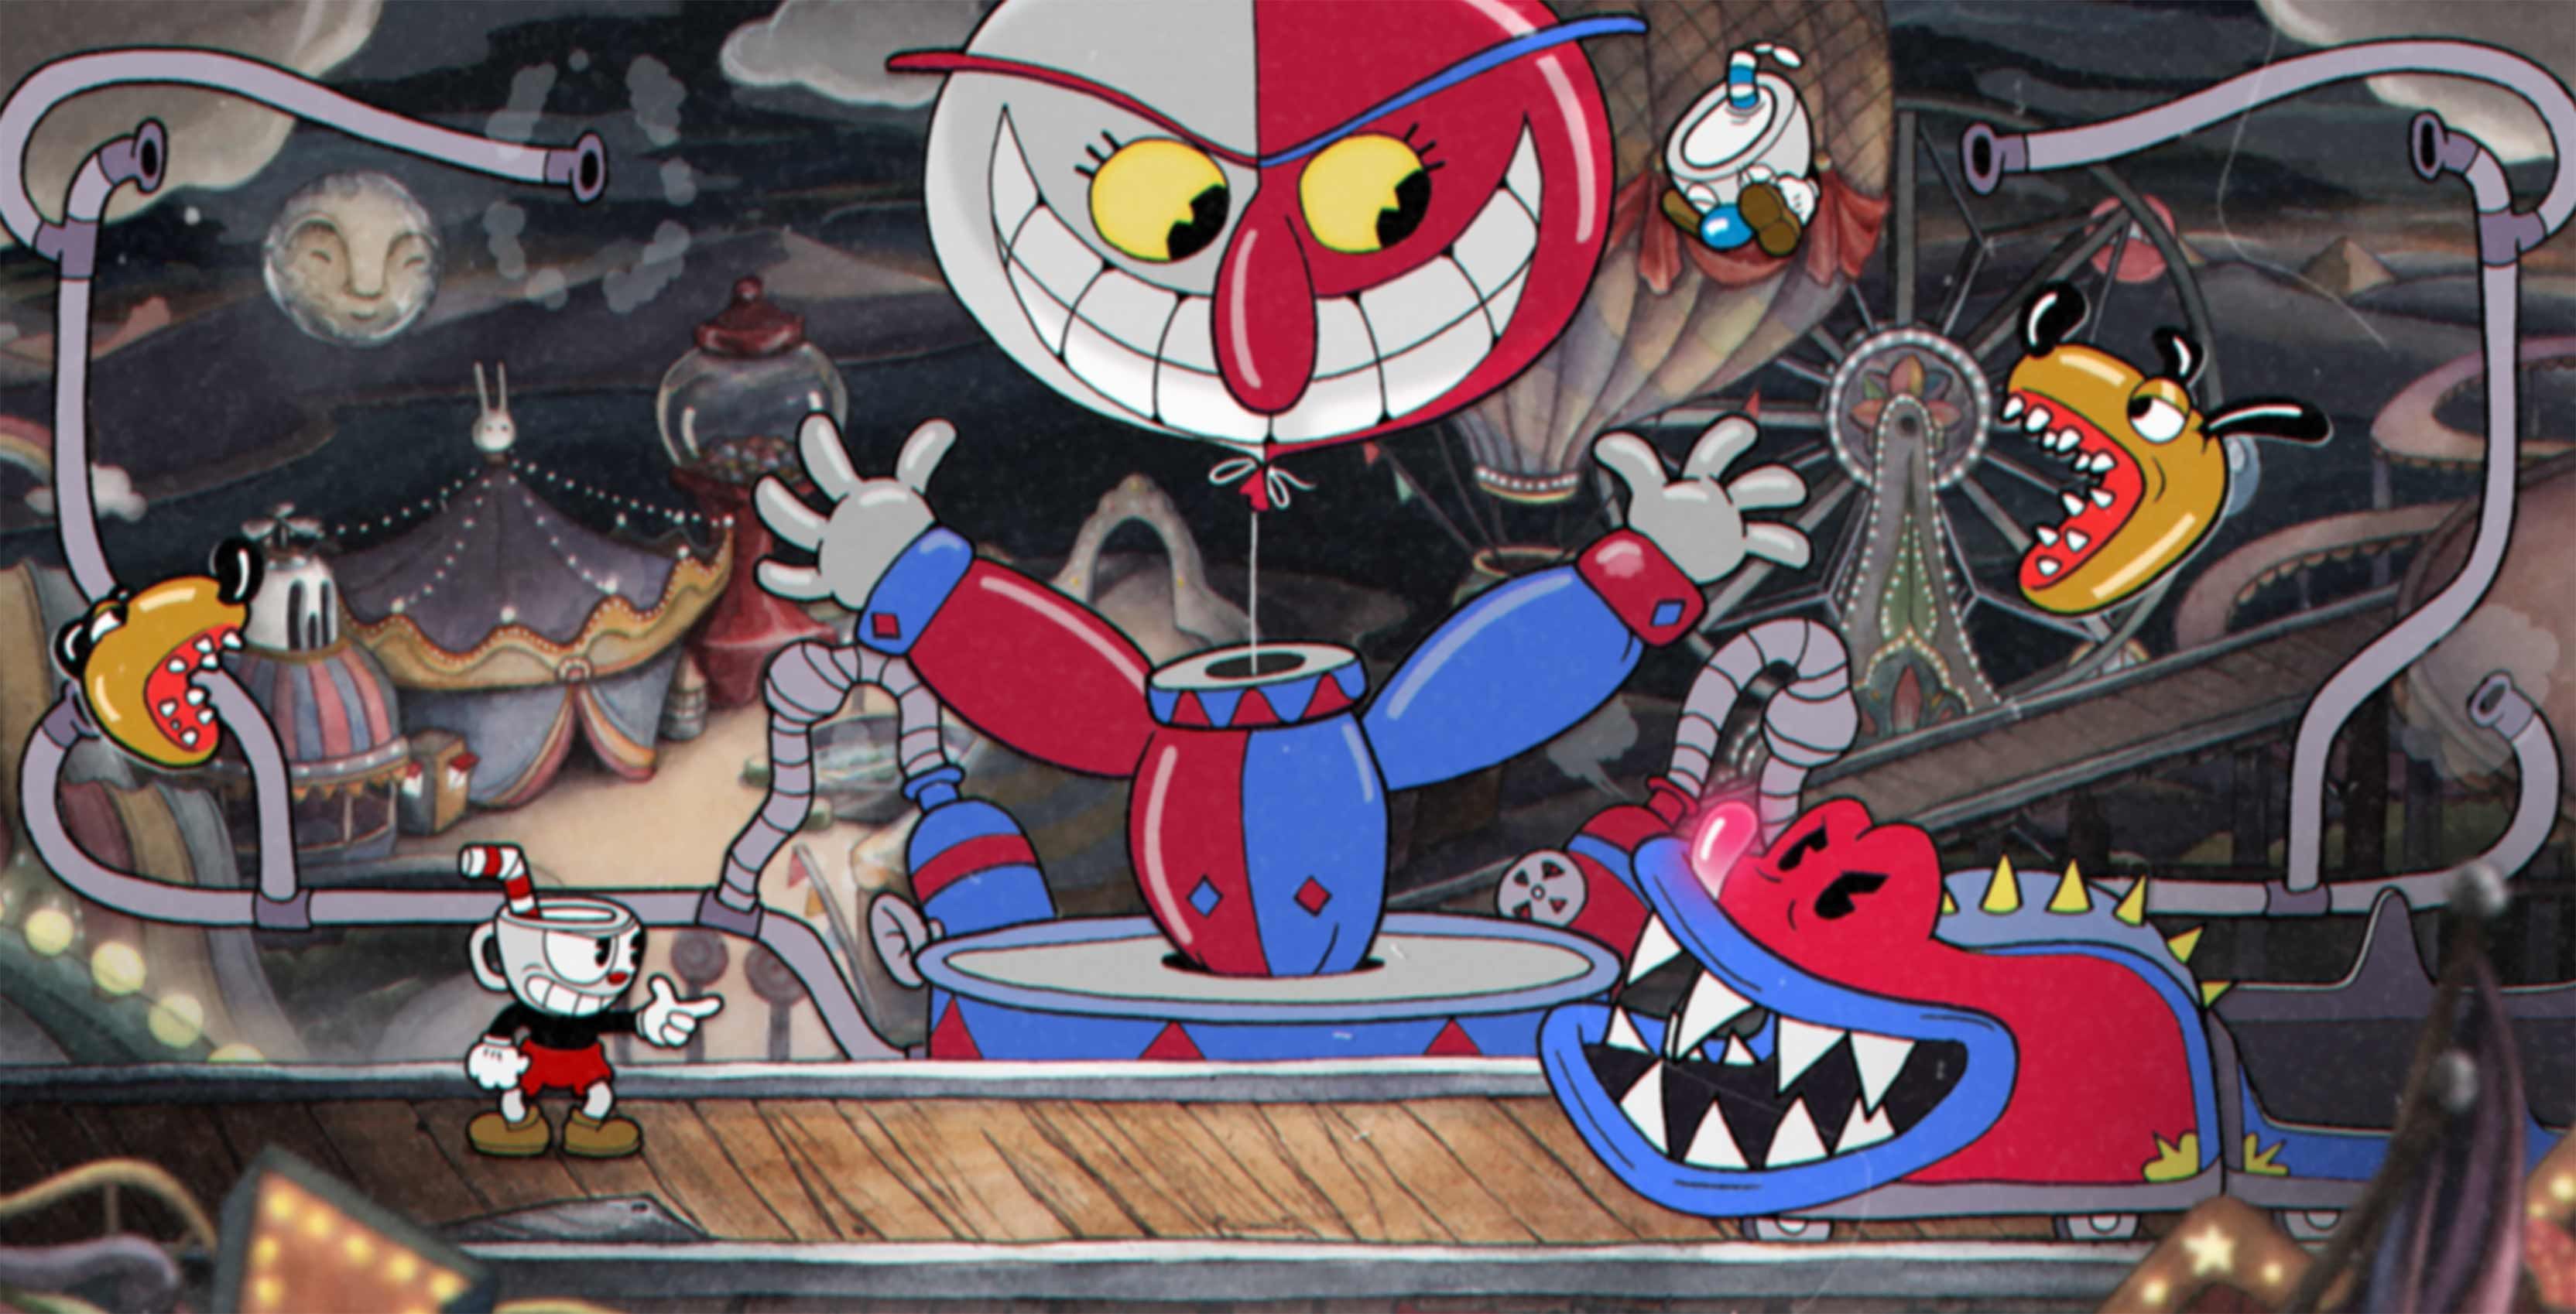 Cuphead Switch Review Old Timey Fun & Challenge On A Small Screen